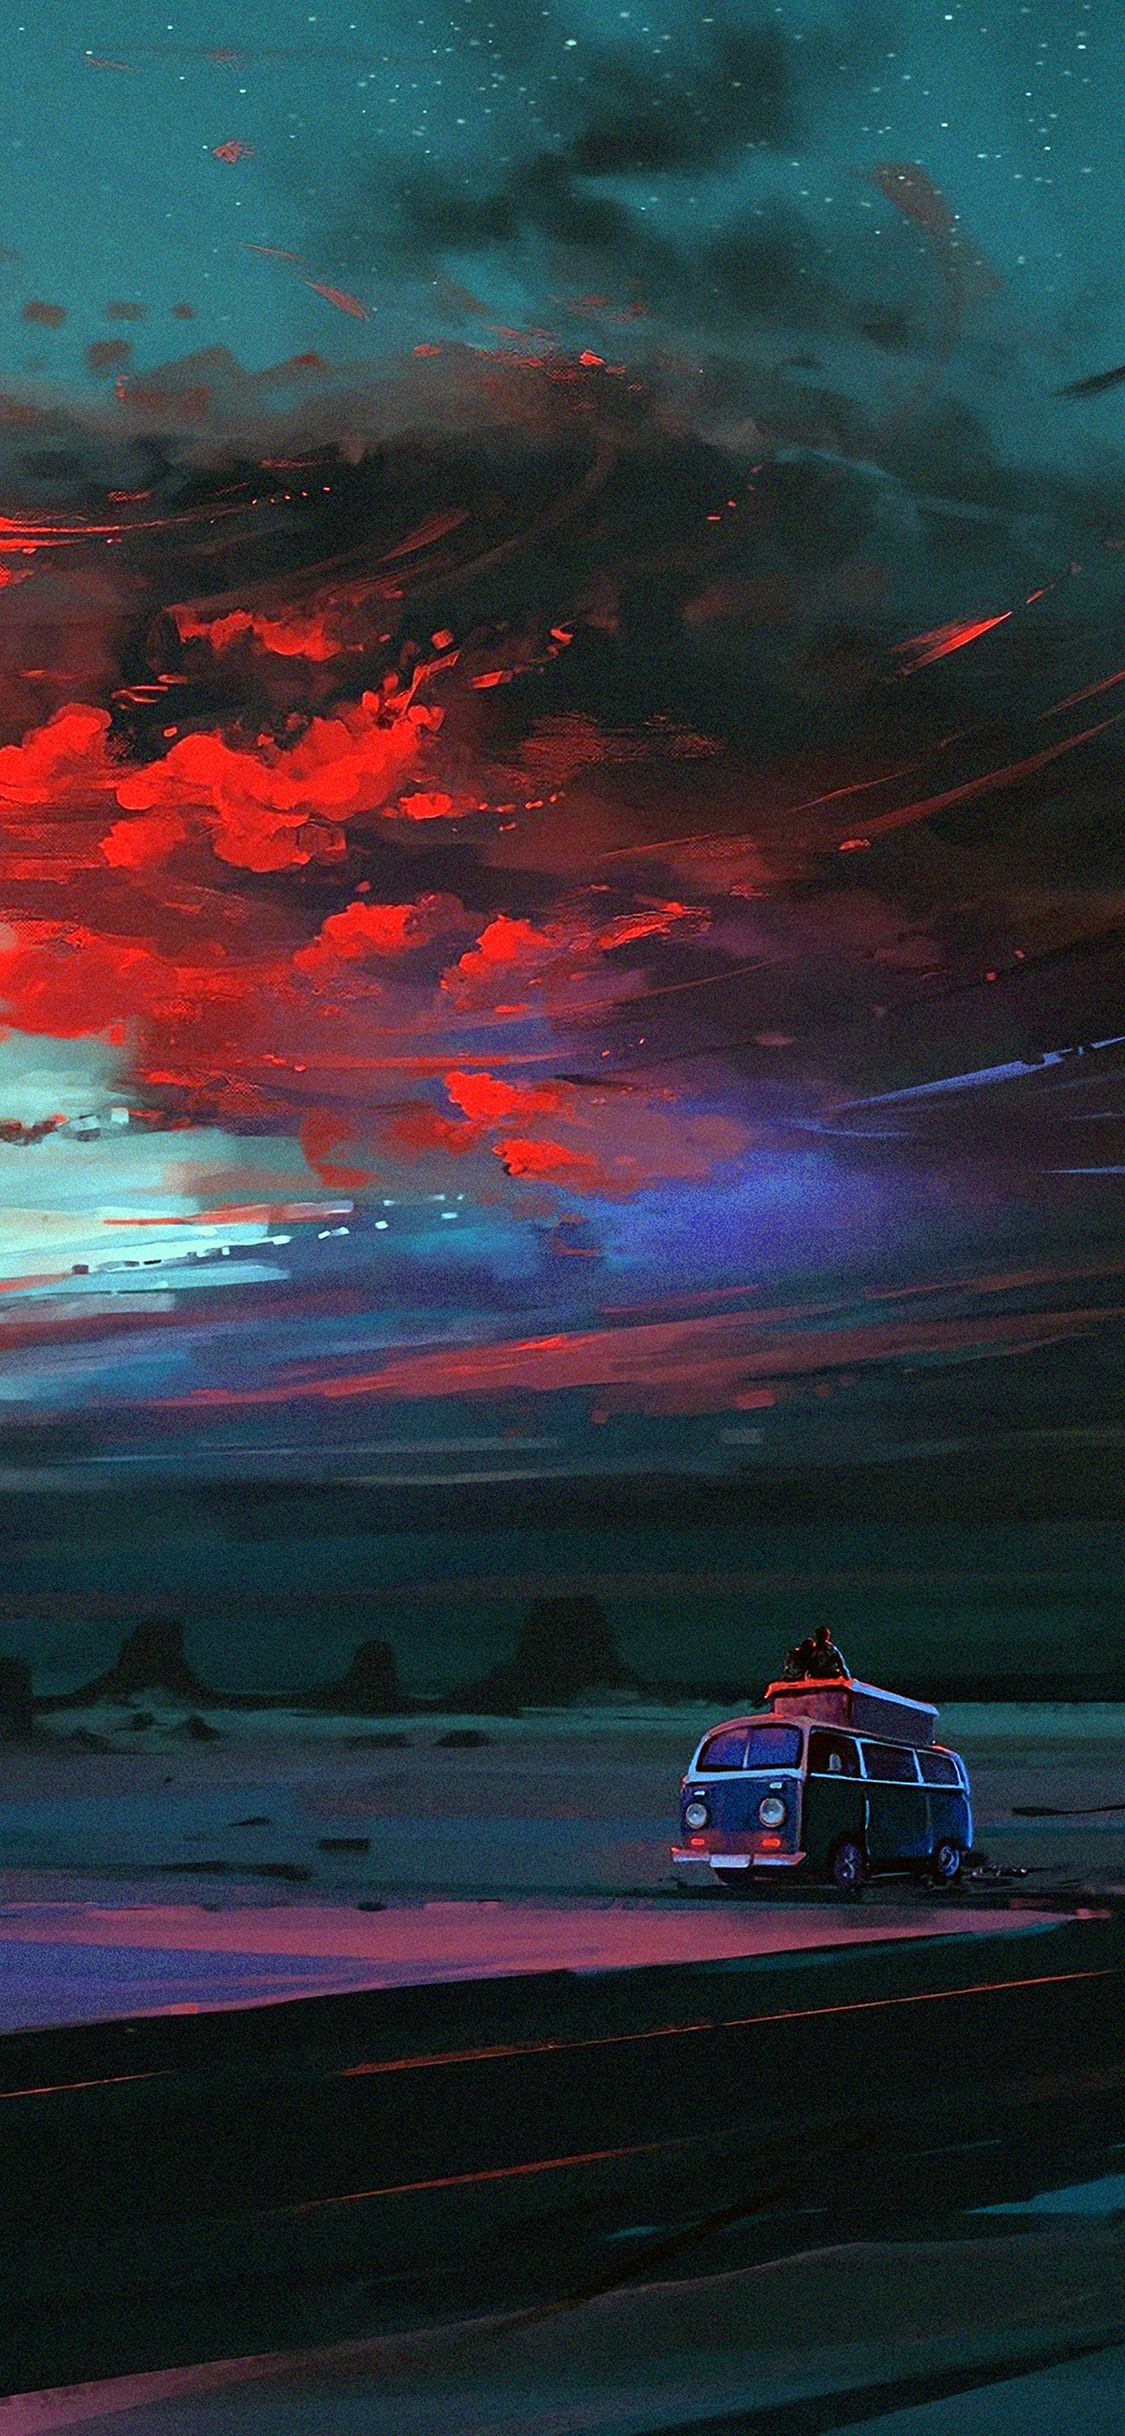 A painting of a van on a road with a red sky - Night, crimson, anime